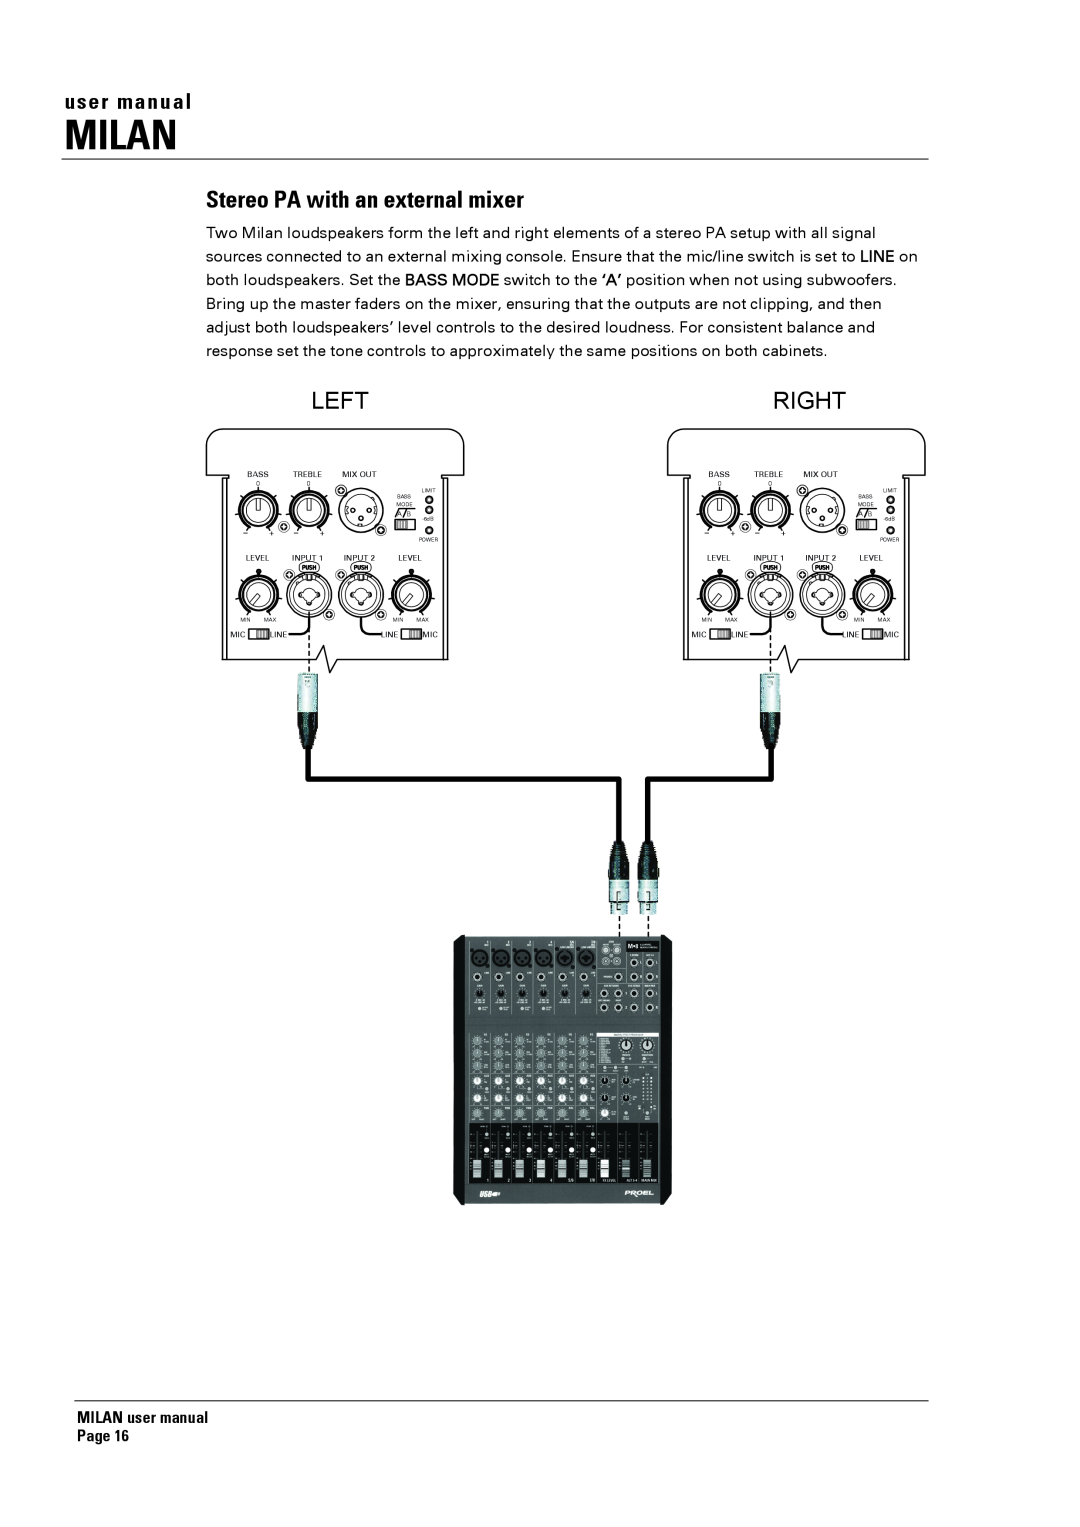 Turbosound MI5 Stereo PA with an external mixer, Milan, Left, Right, MILAN user manual Page 